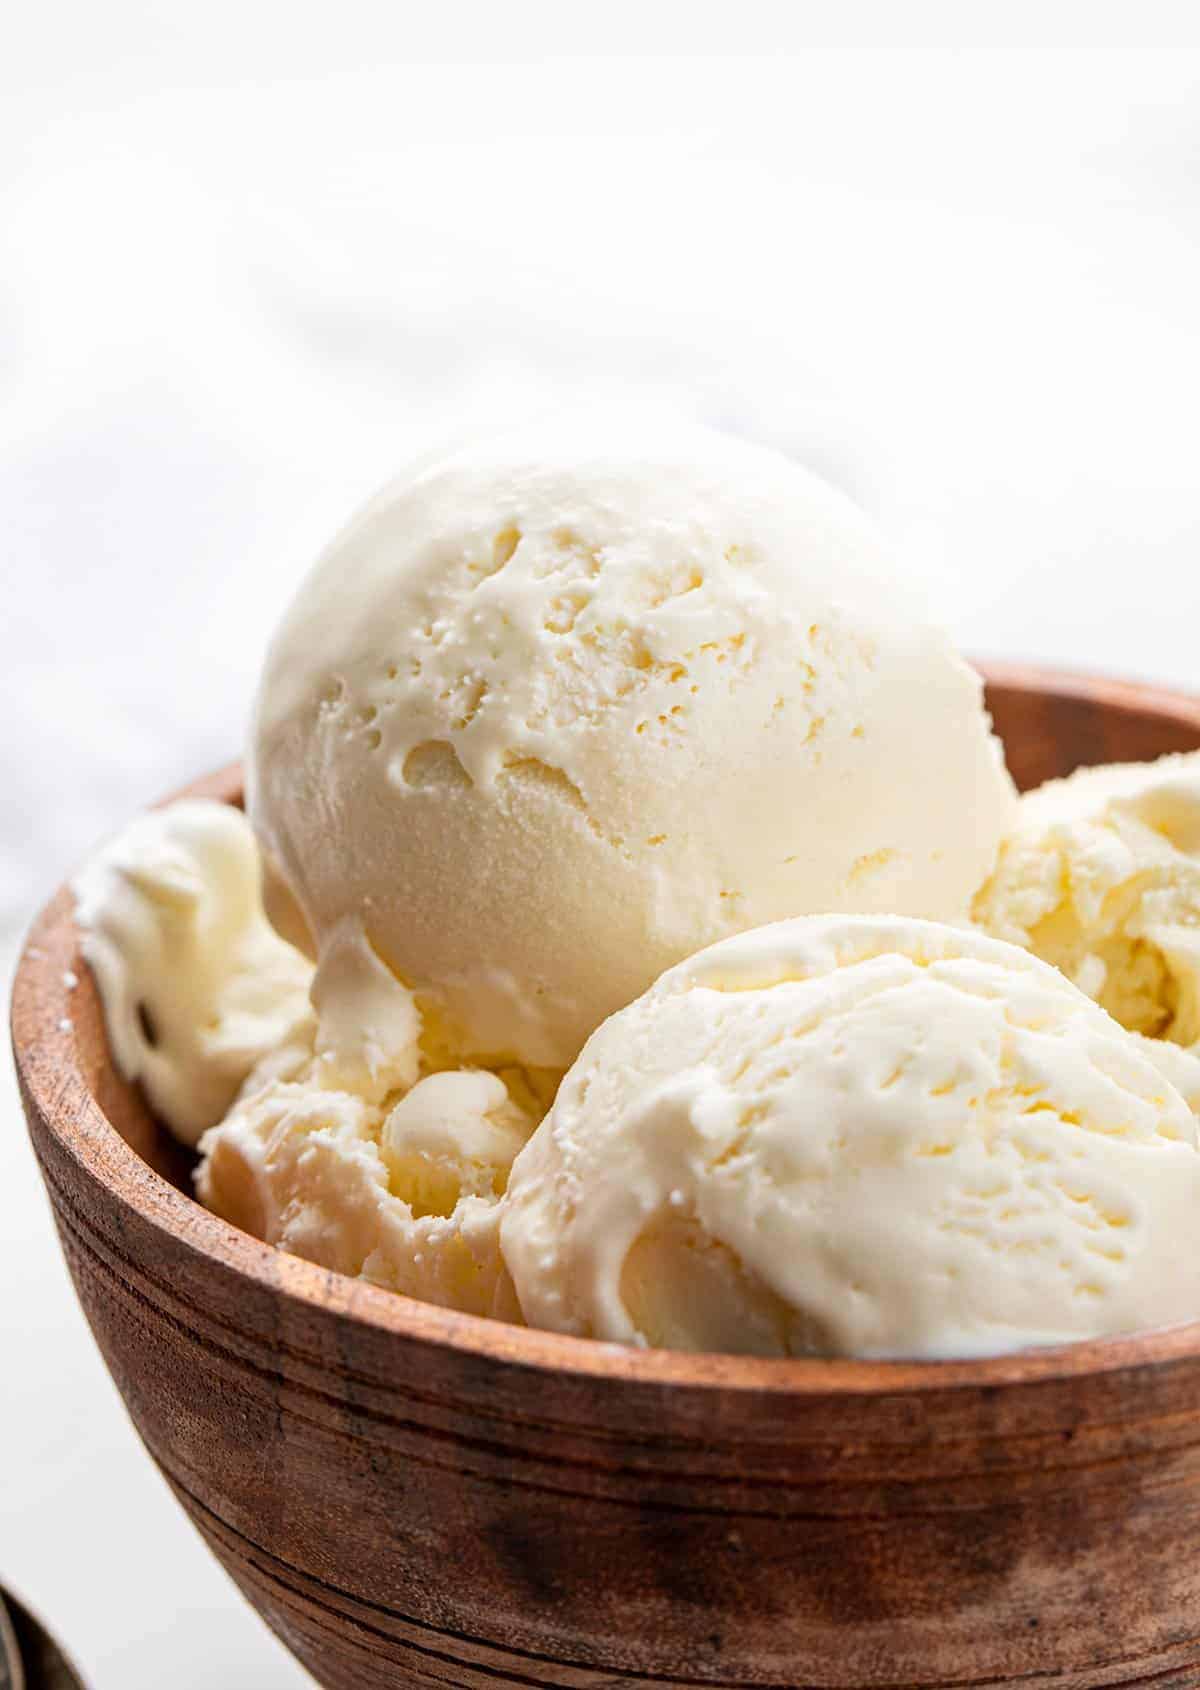 No Churn Ice Cream Scoops in a Wooden Bowl